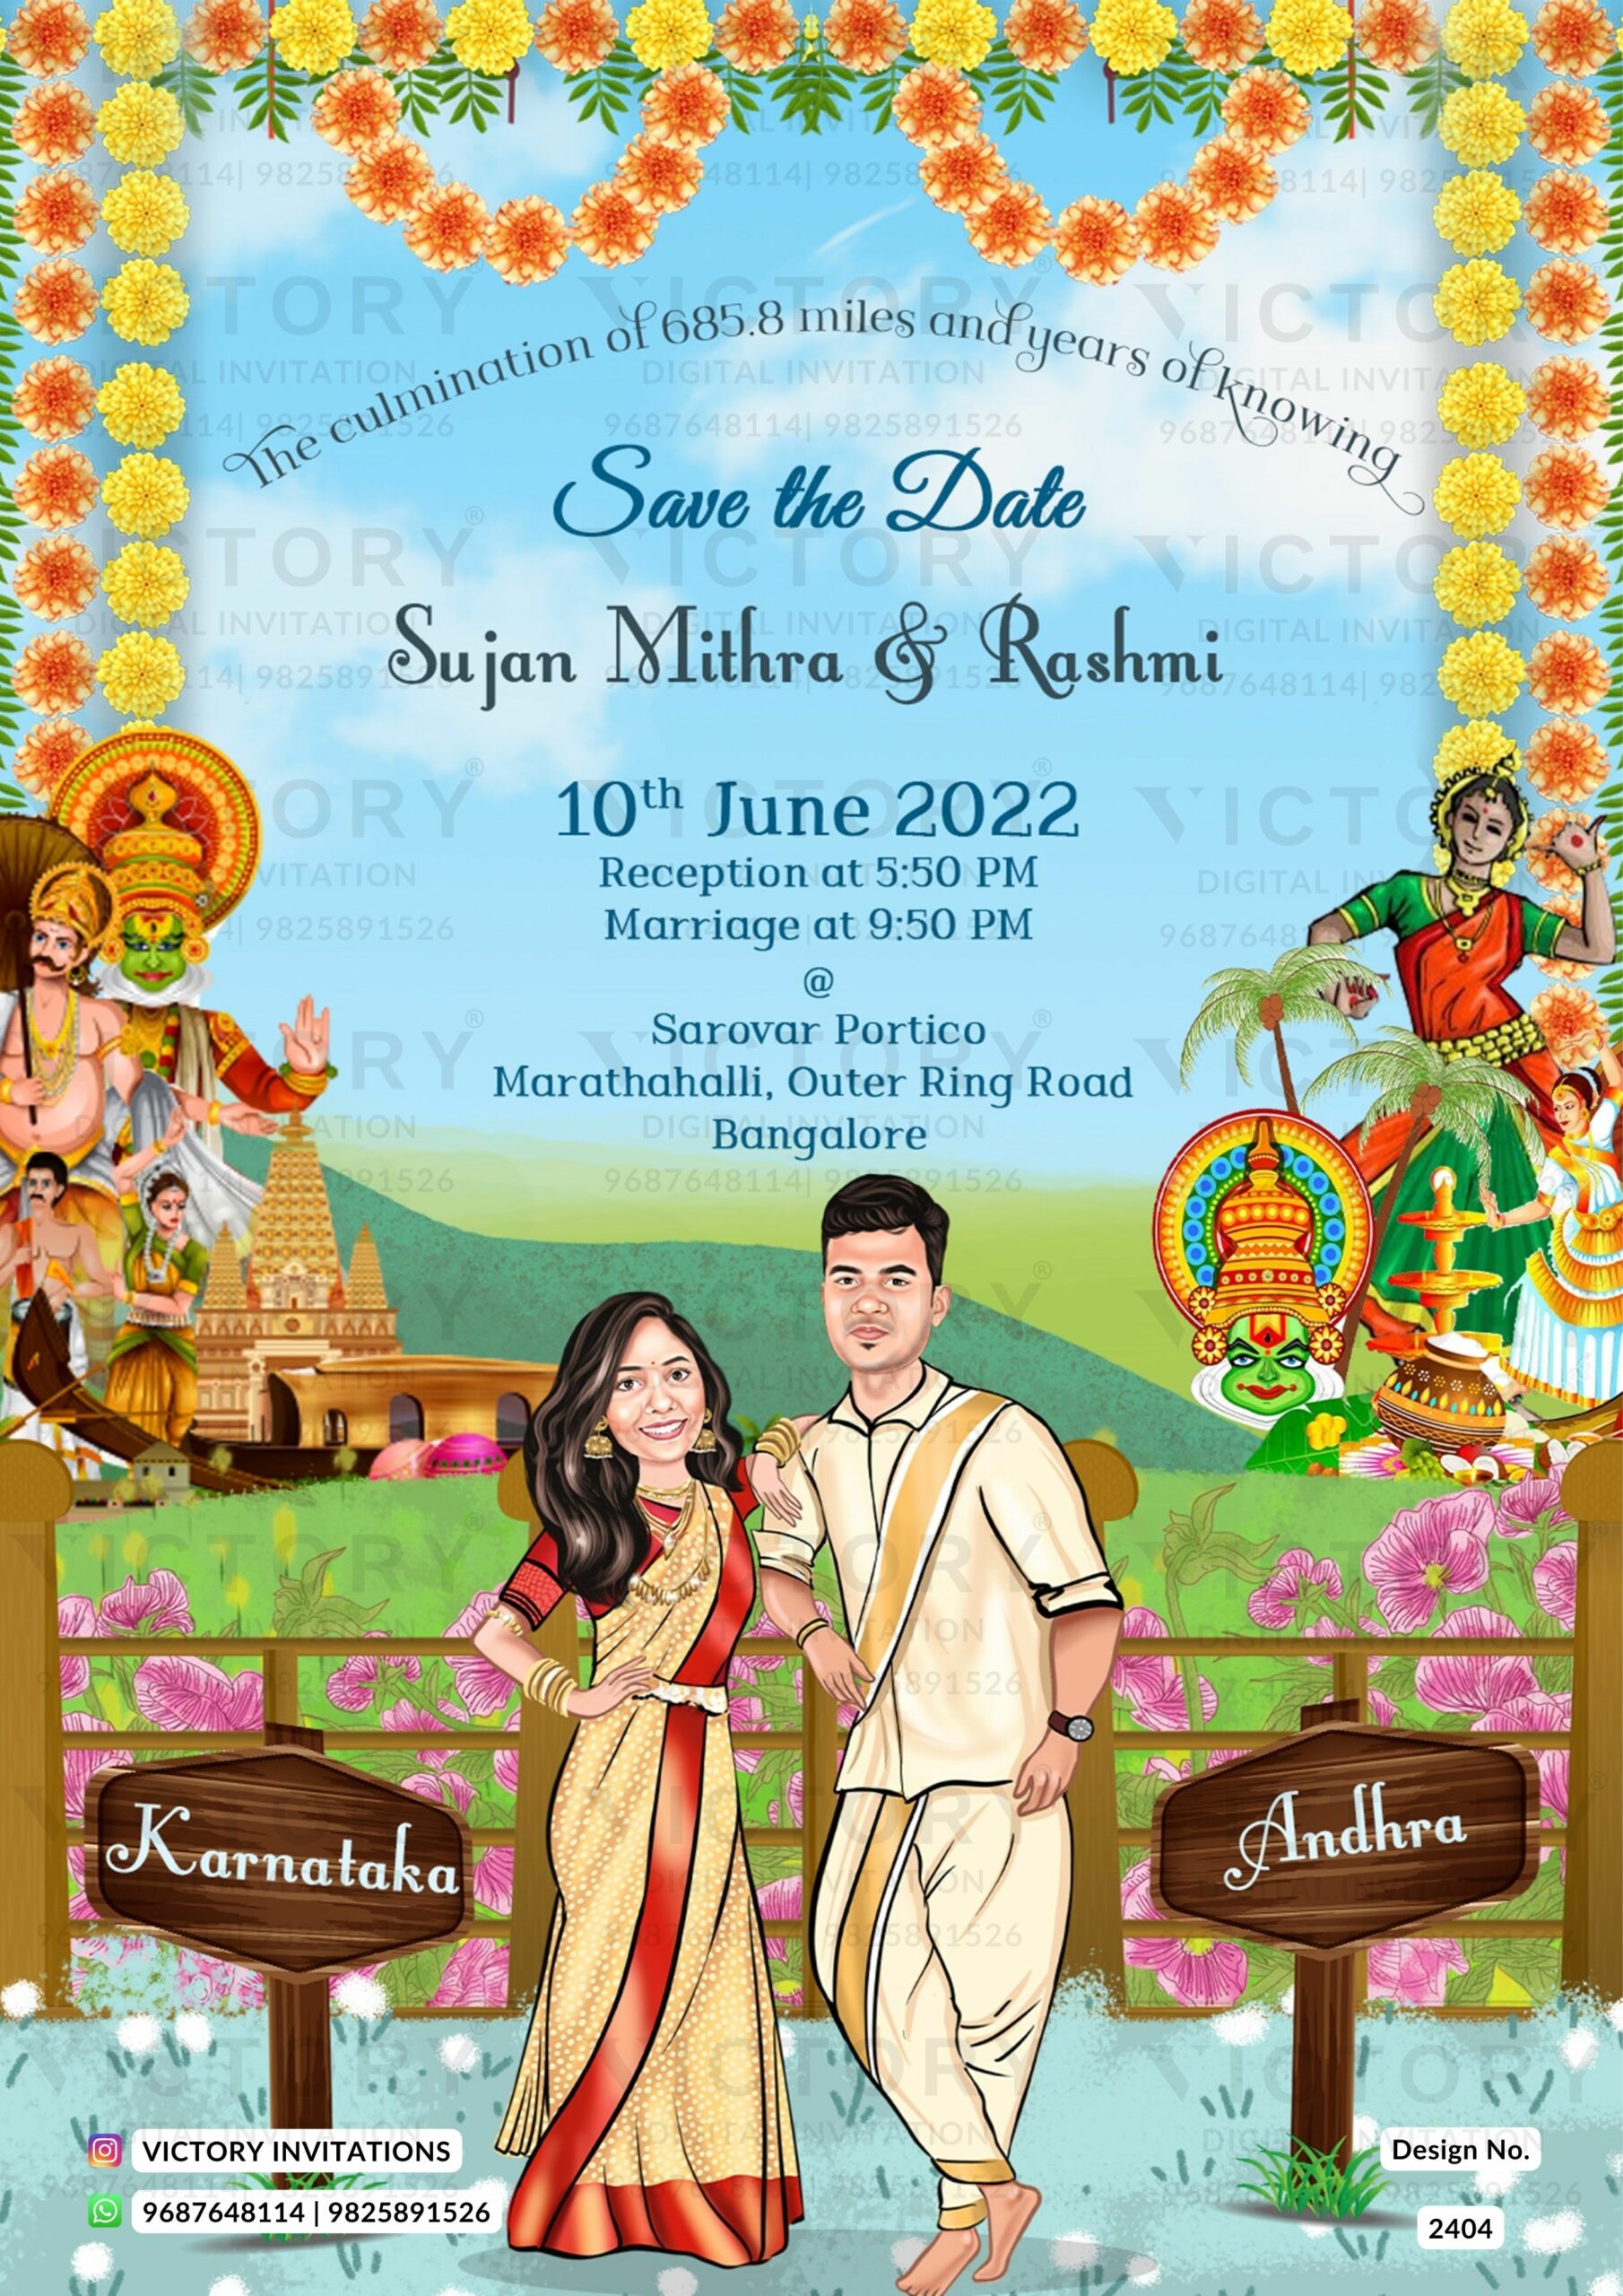 Best-selling Two-State Theme Digital Wedding Invite in English Language,  design no. 2404 